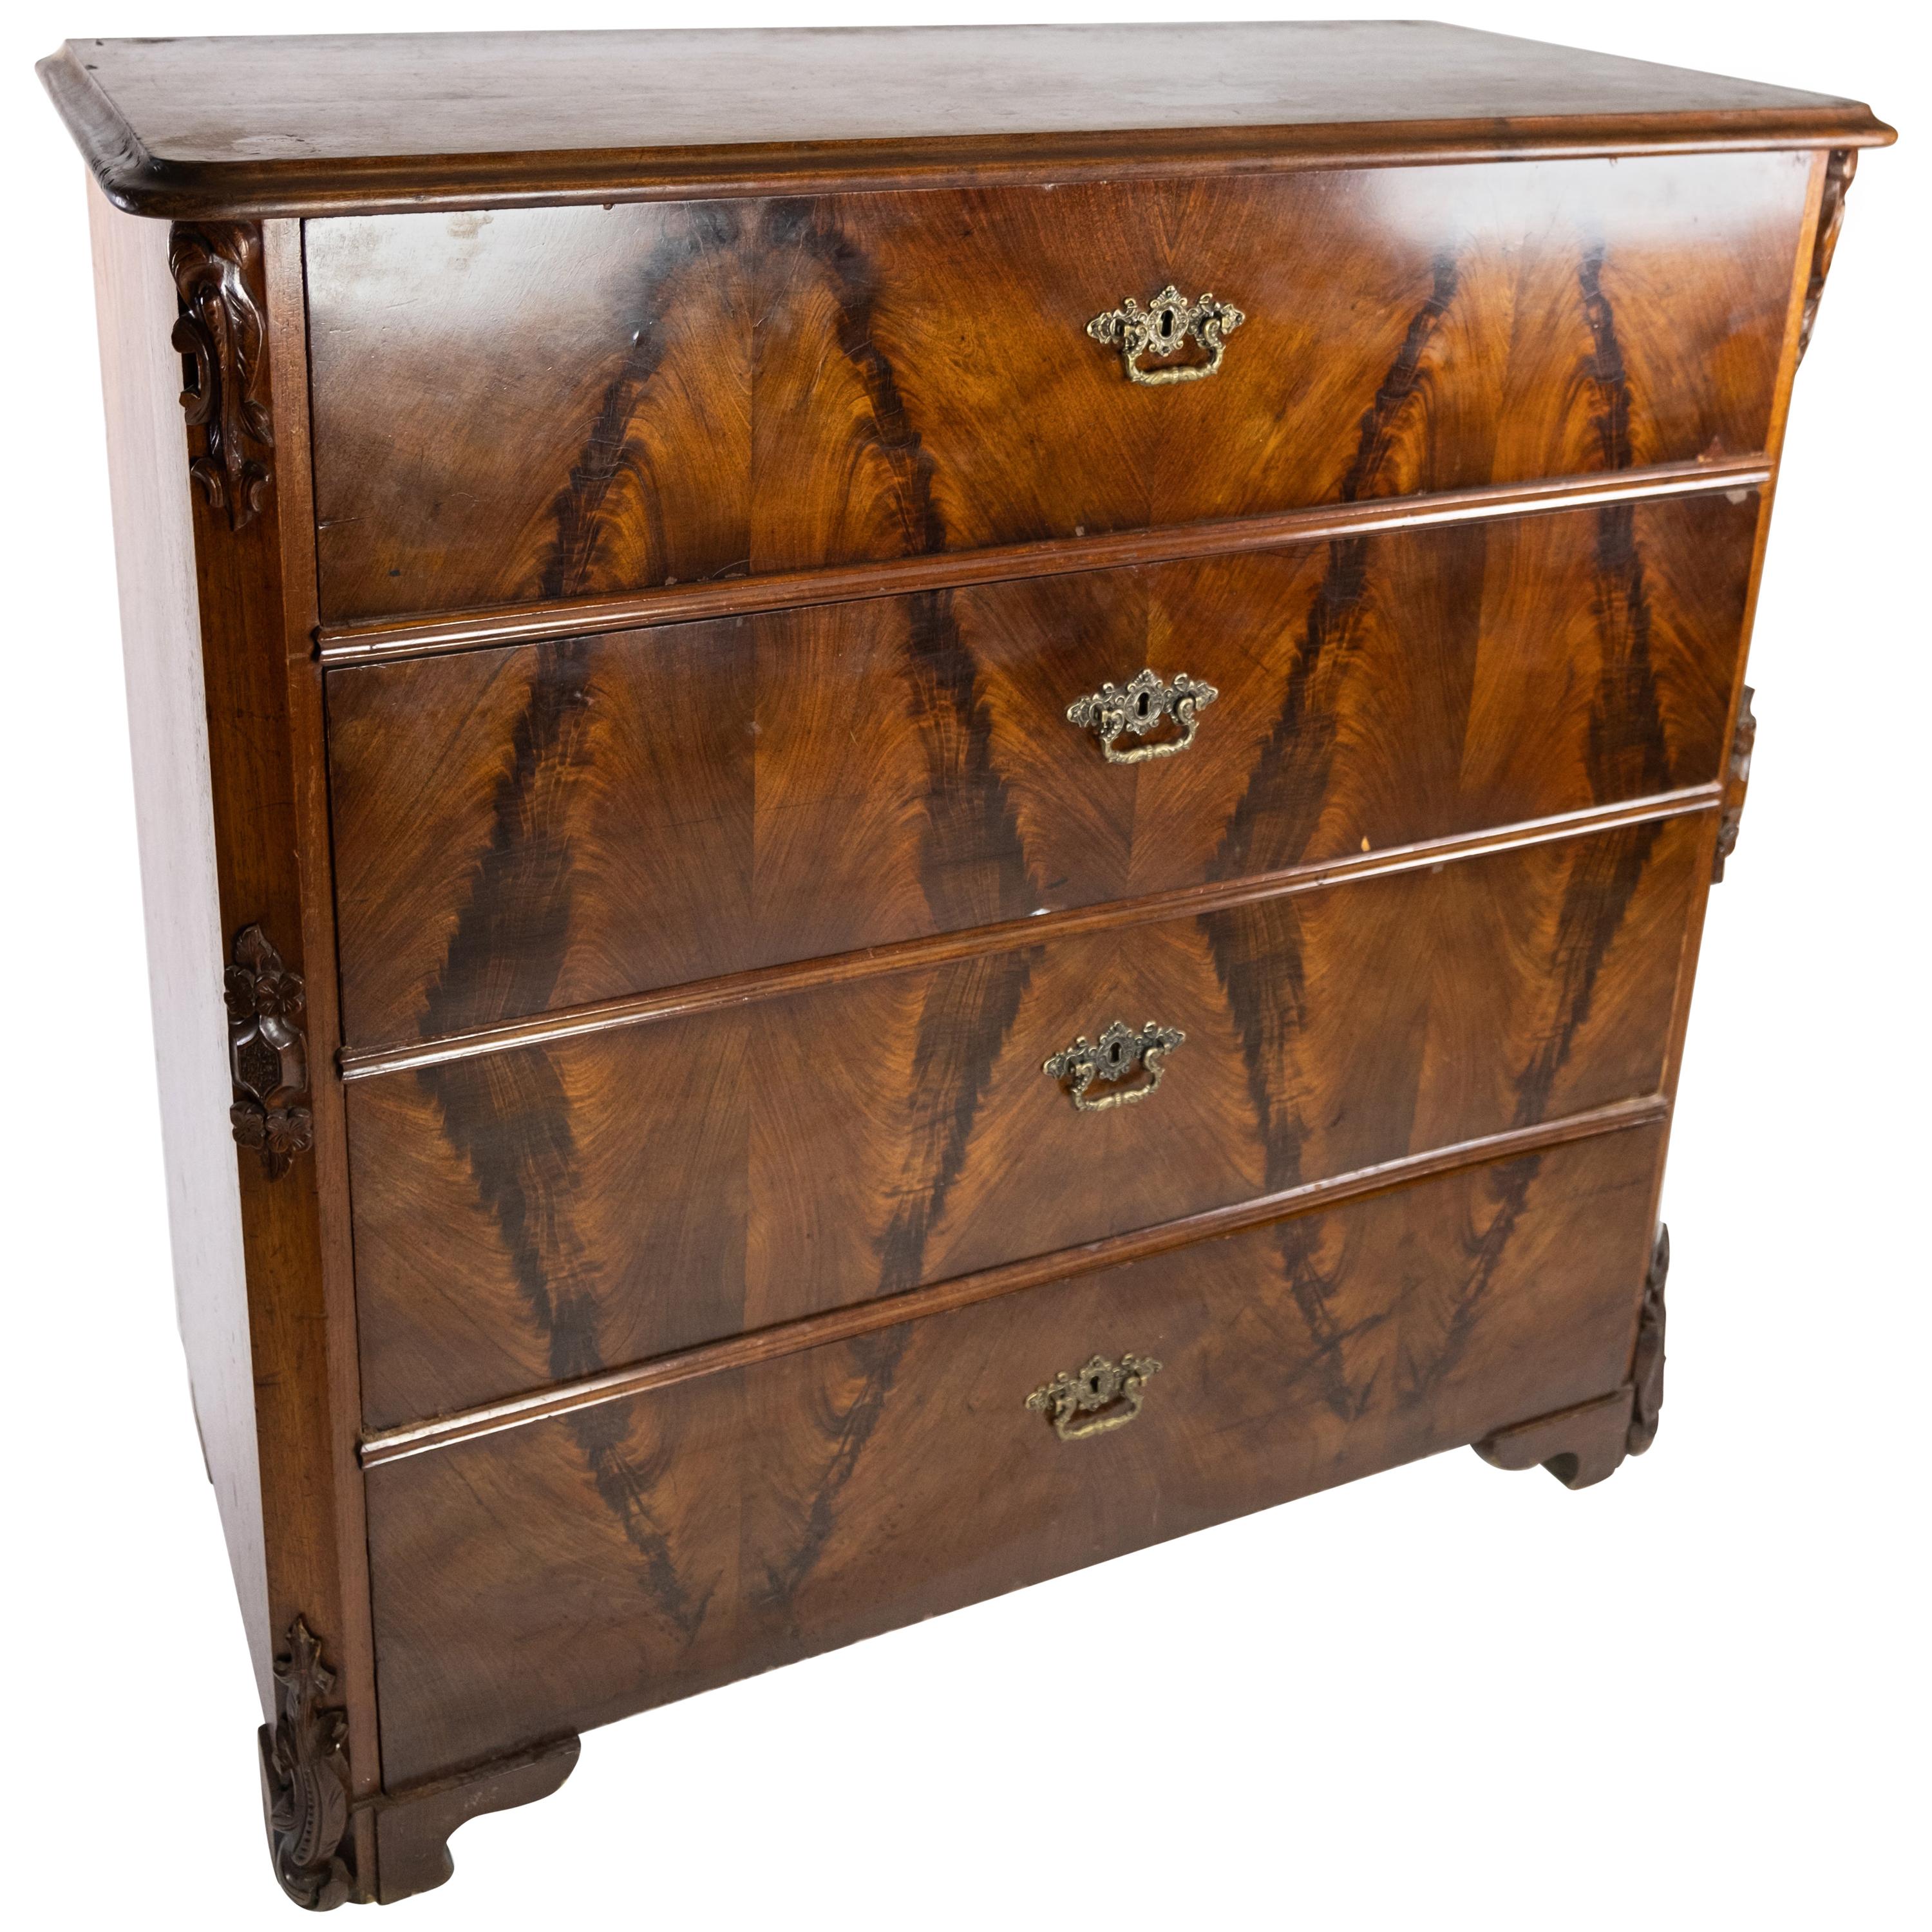 Chest of Drawers of Mahogany, in Great Antique Condition from the 1860s